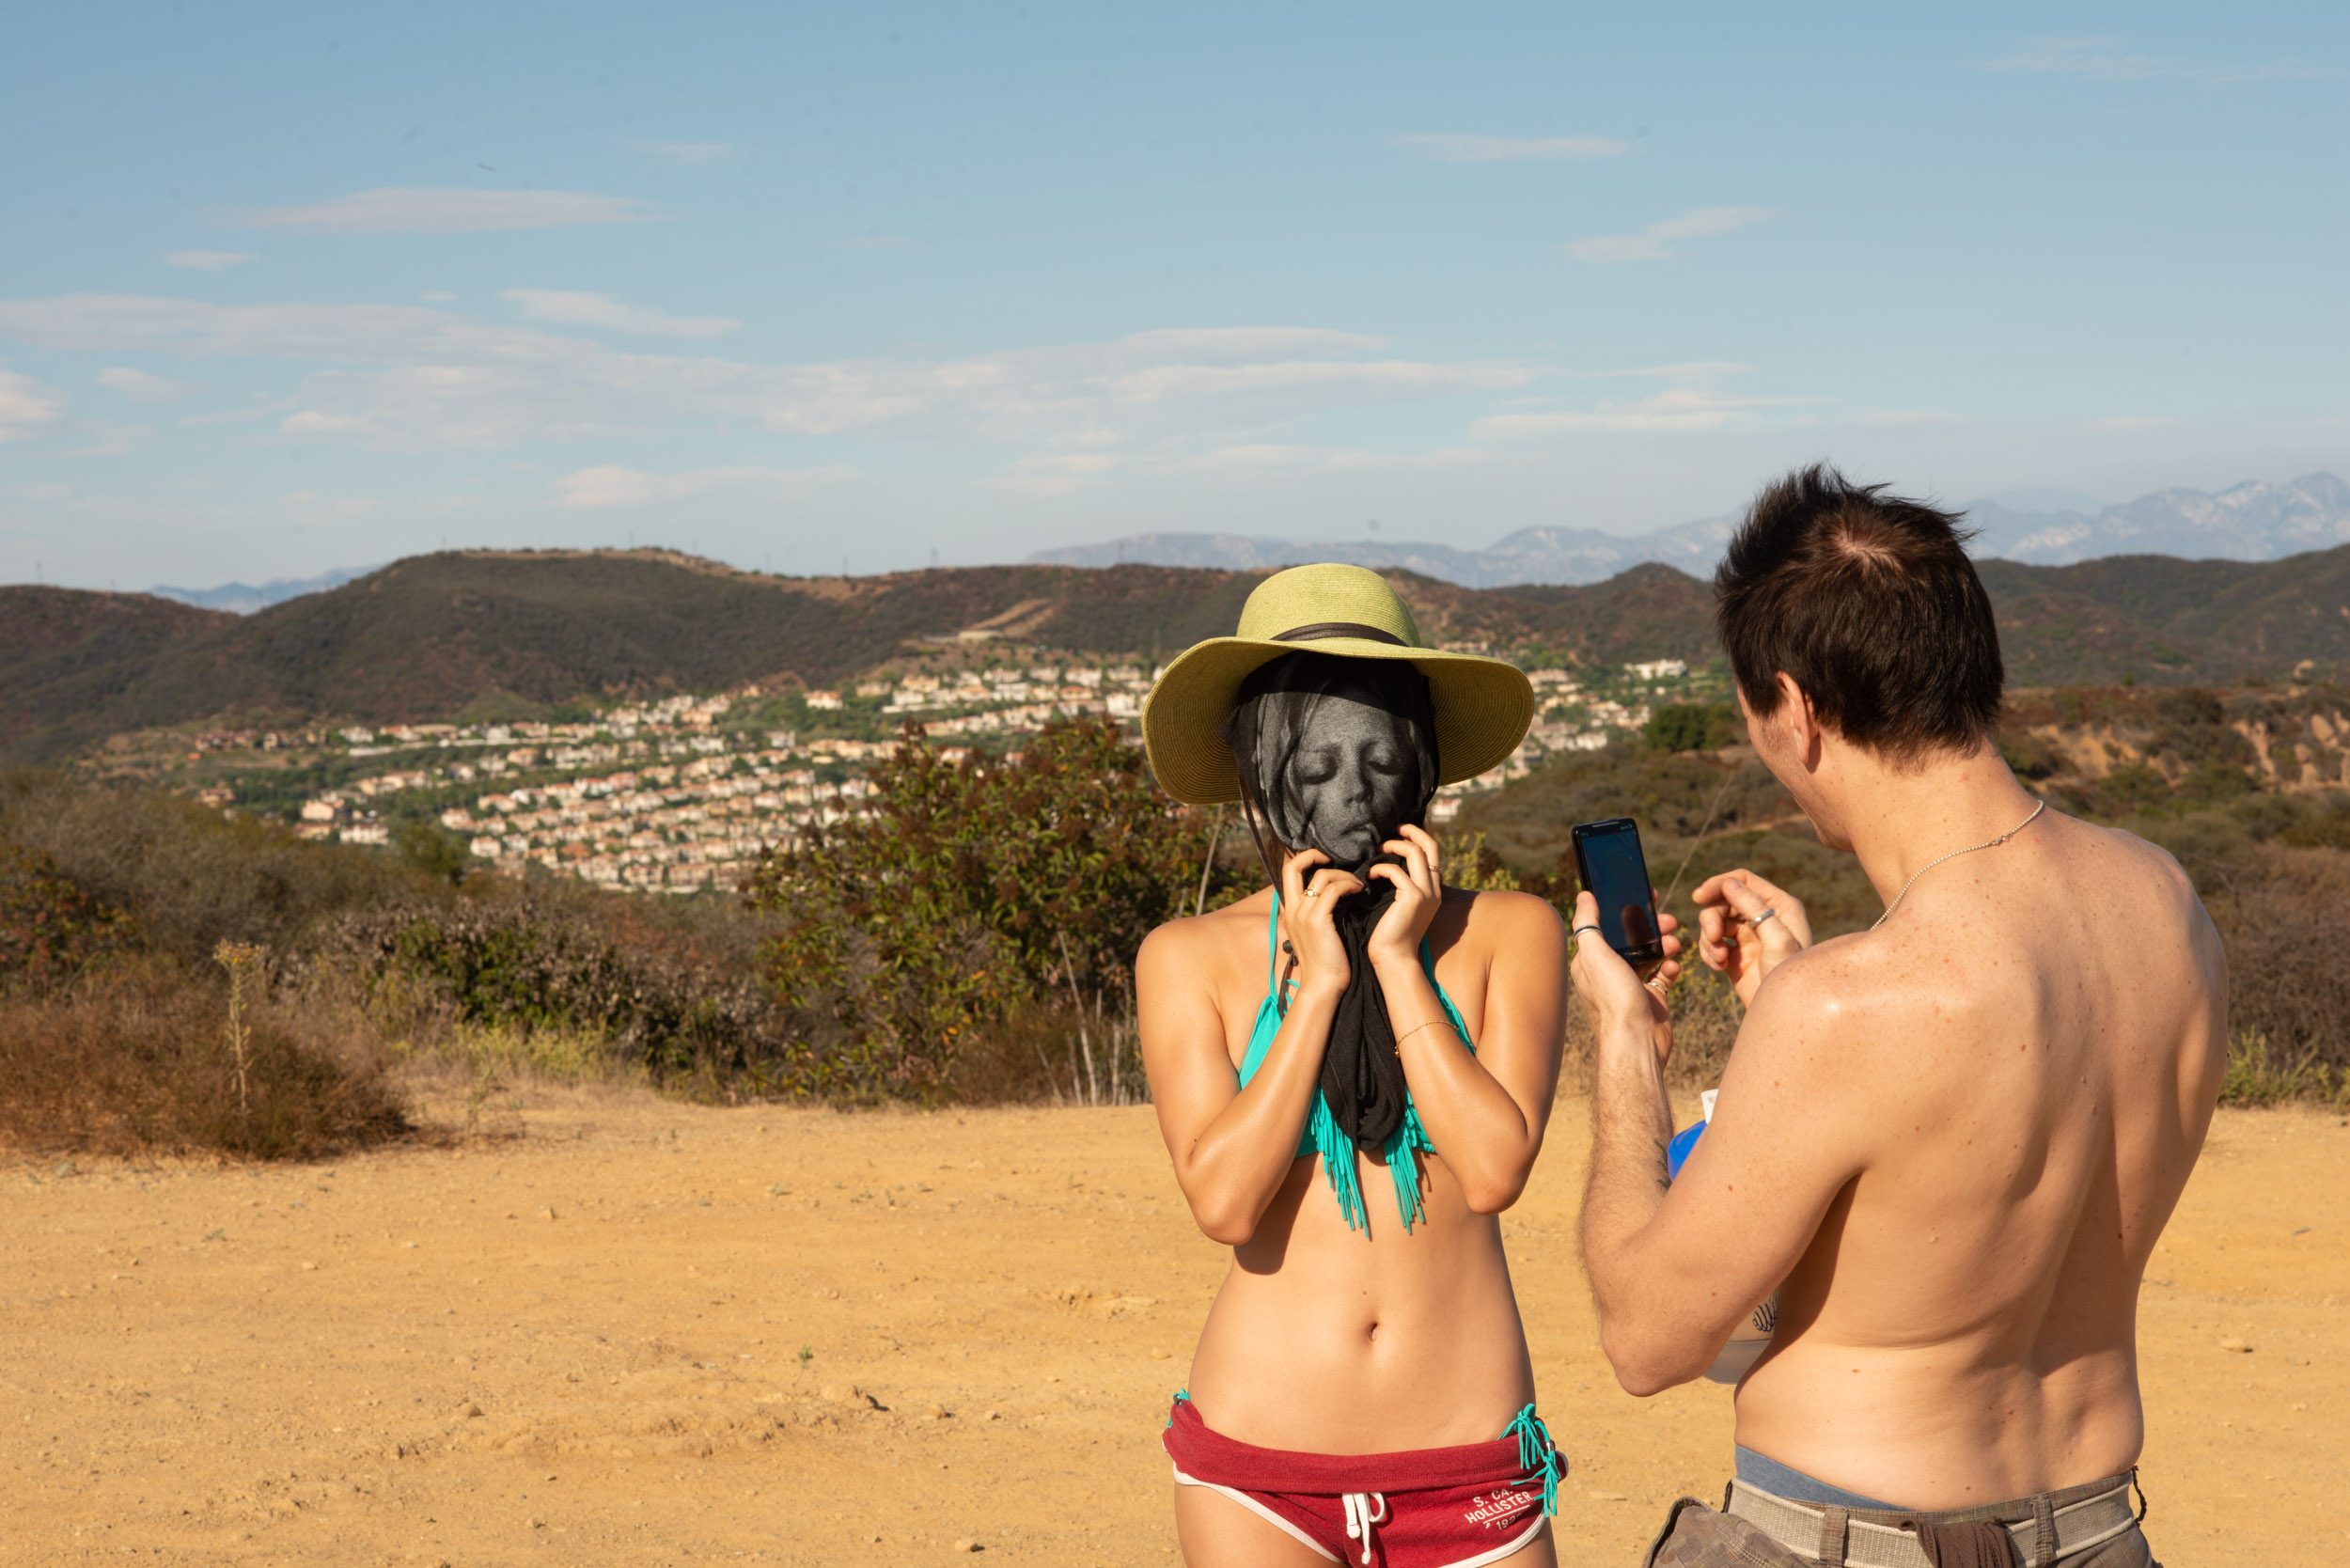 A man takes a picture of a woman holding a teeshirt mask over her face hiking in Malibu, Los Angeles.